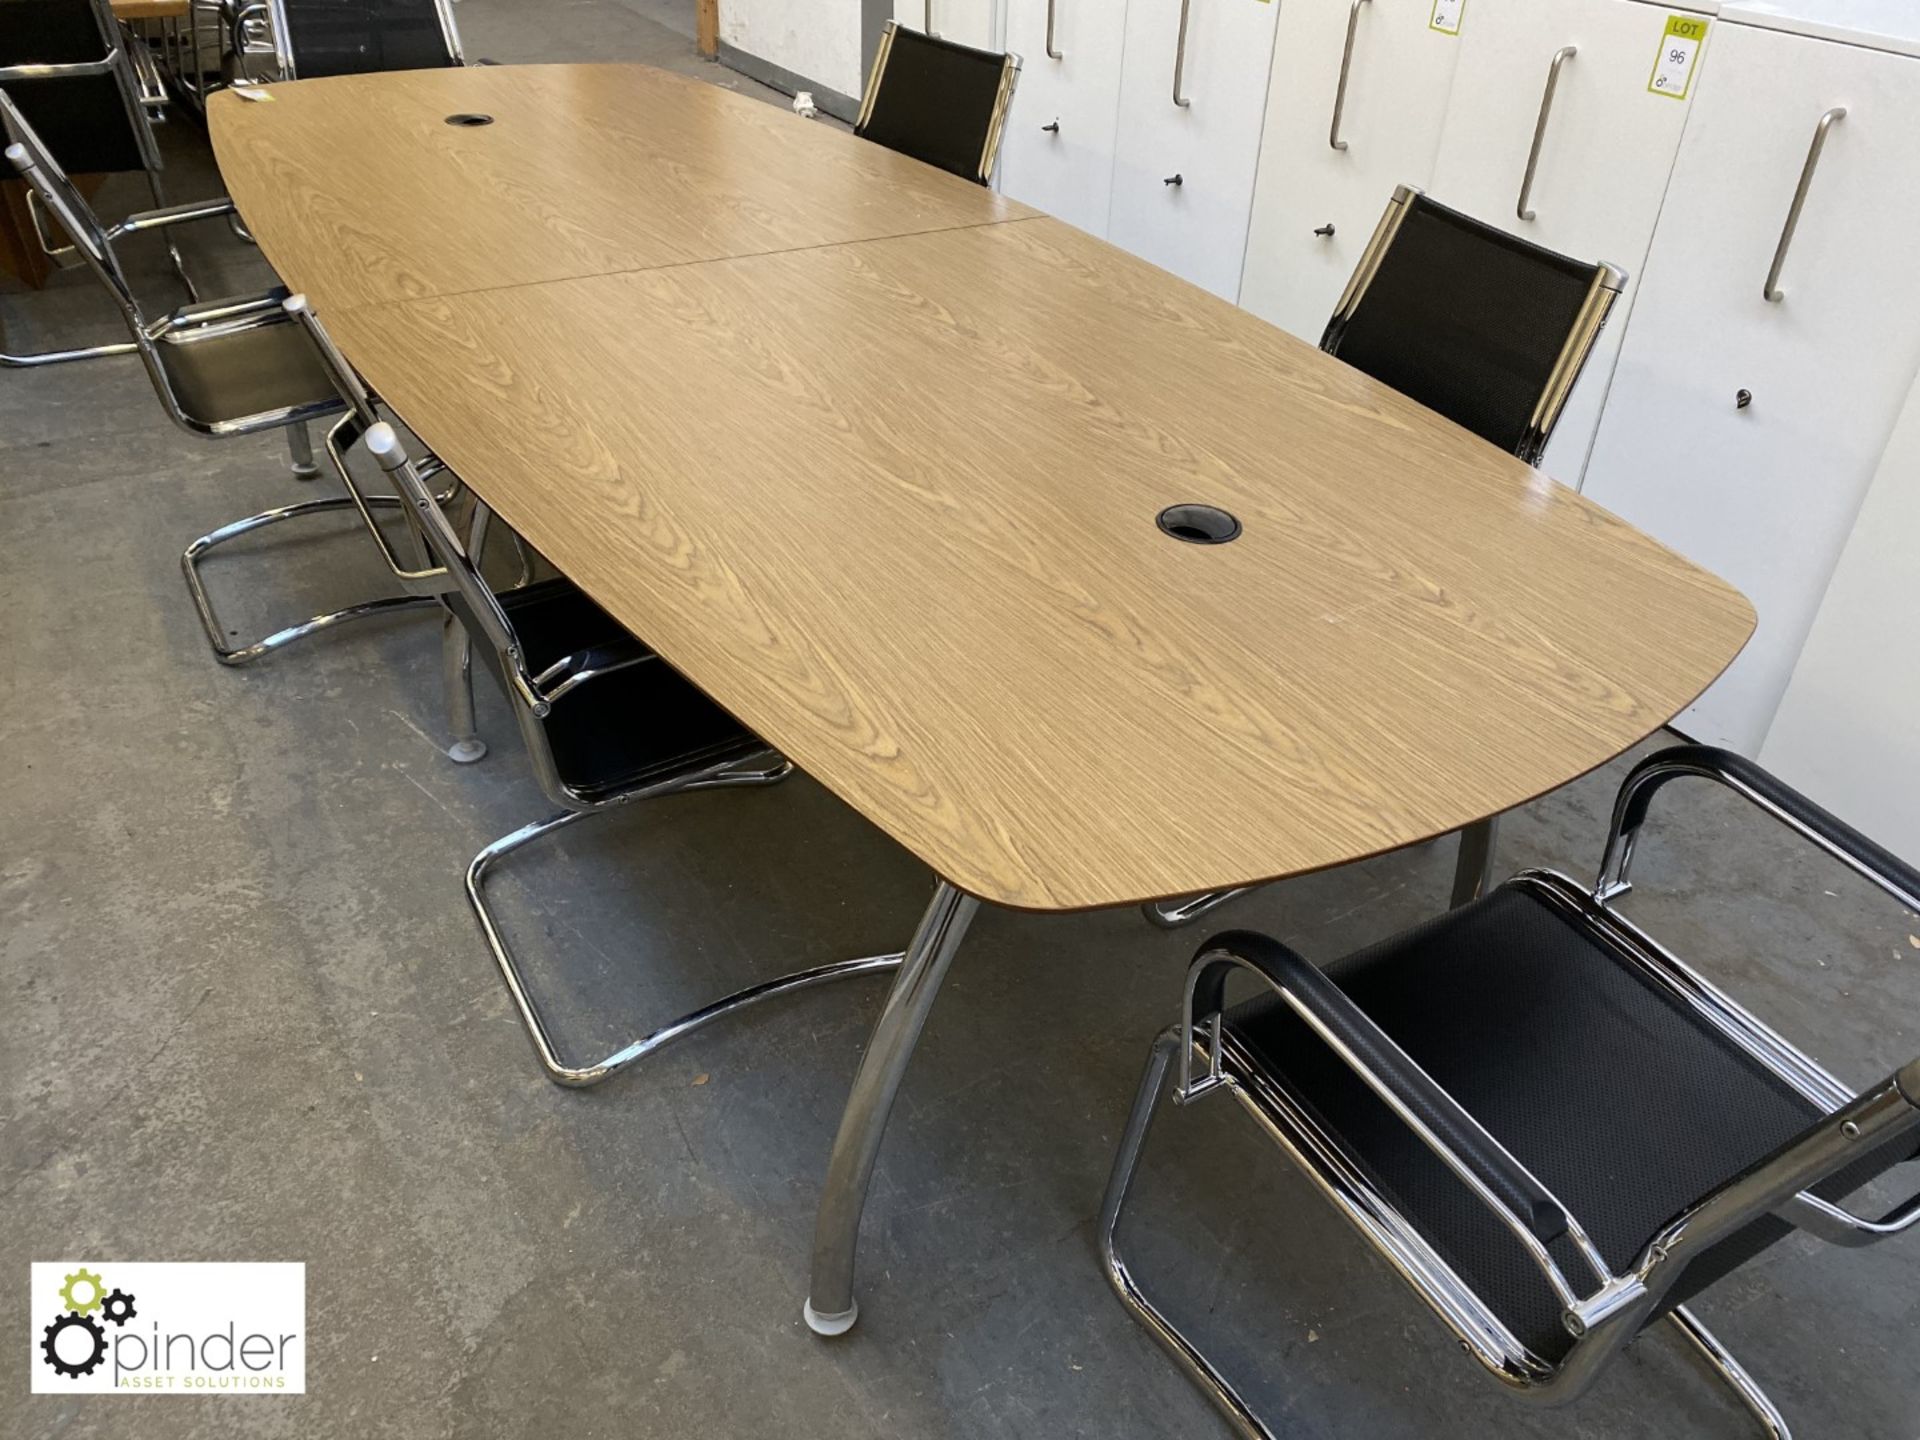 Oak effect 2-section Boardroom Table, 3000mm x 1200mm, with 3 sets chrome legs - Image 5 of 5